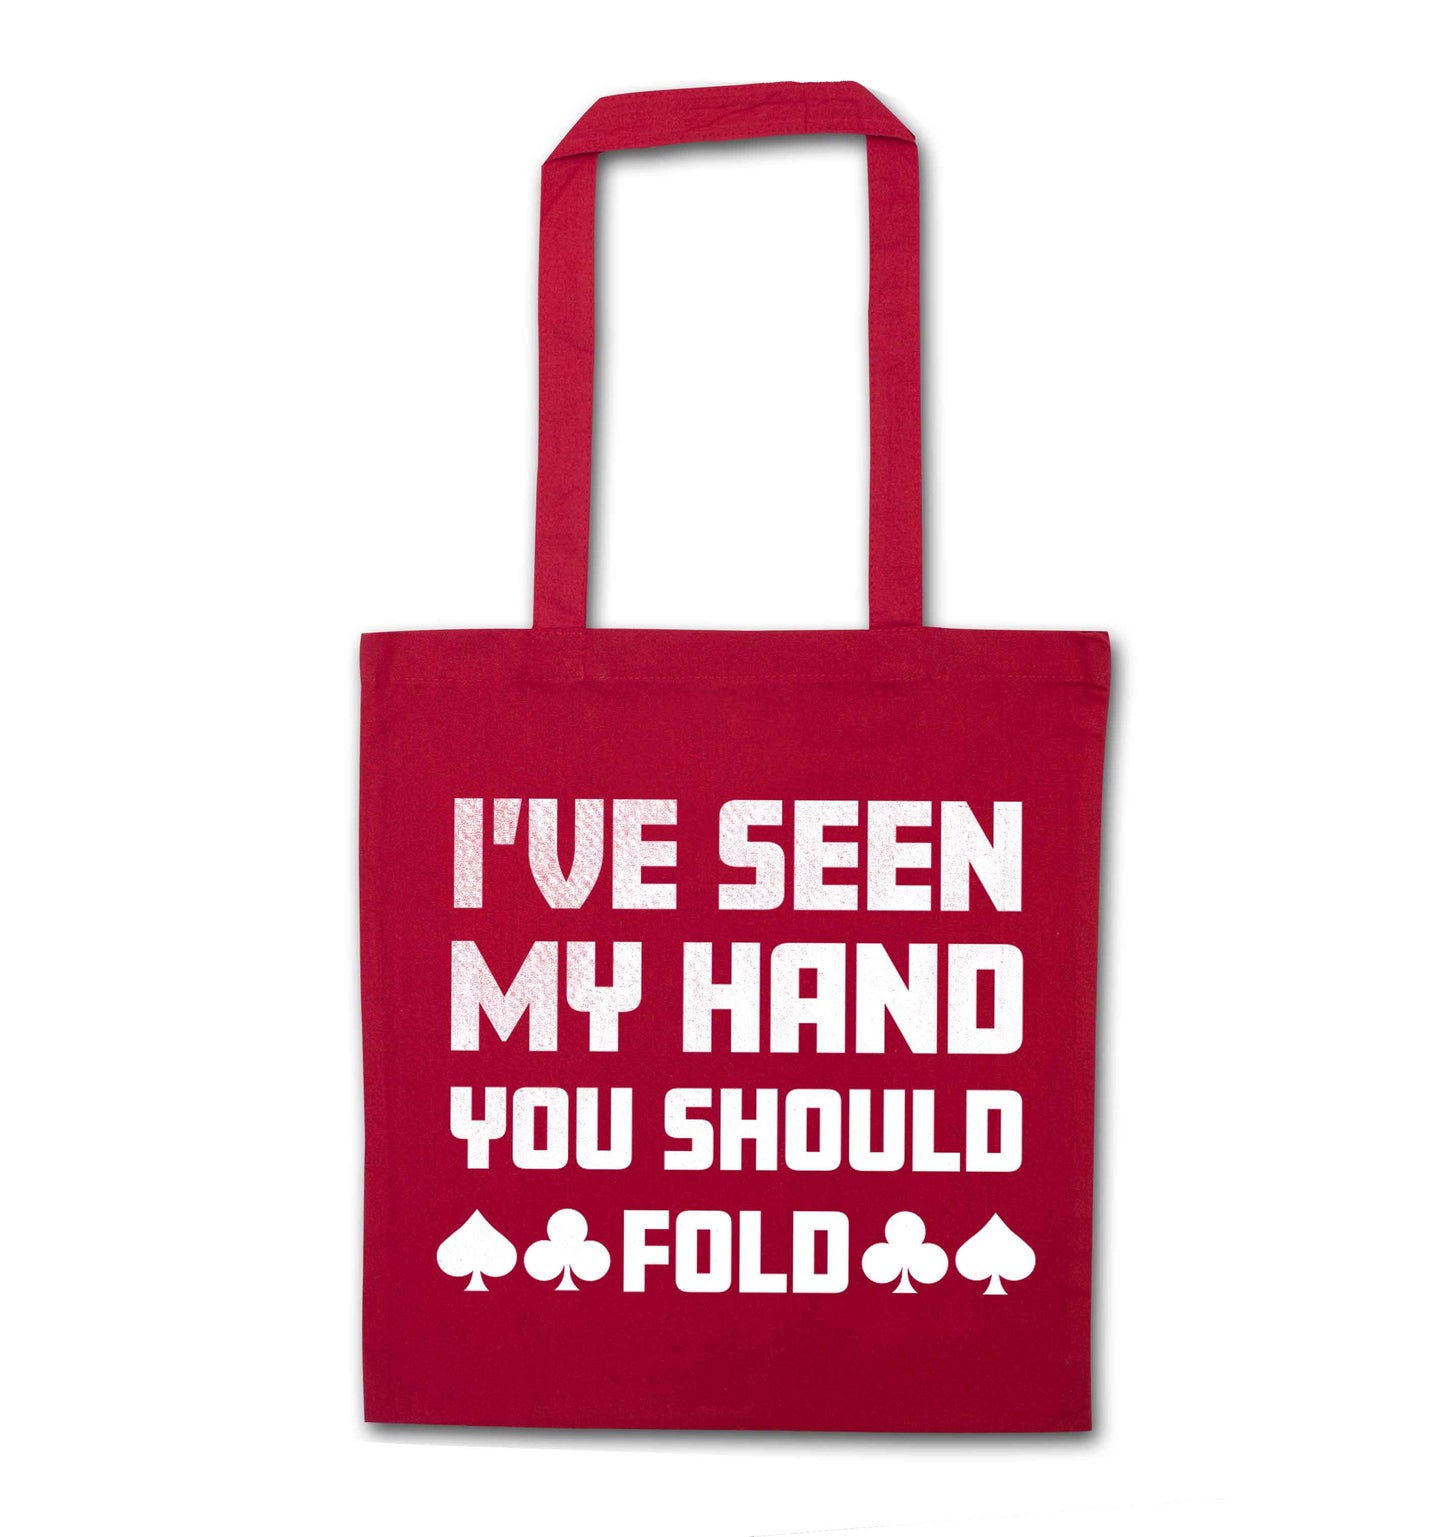 I've seen my hand you should fold red tote bag